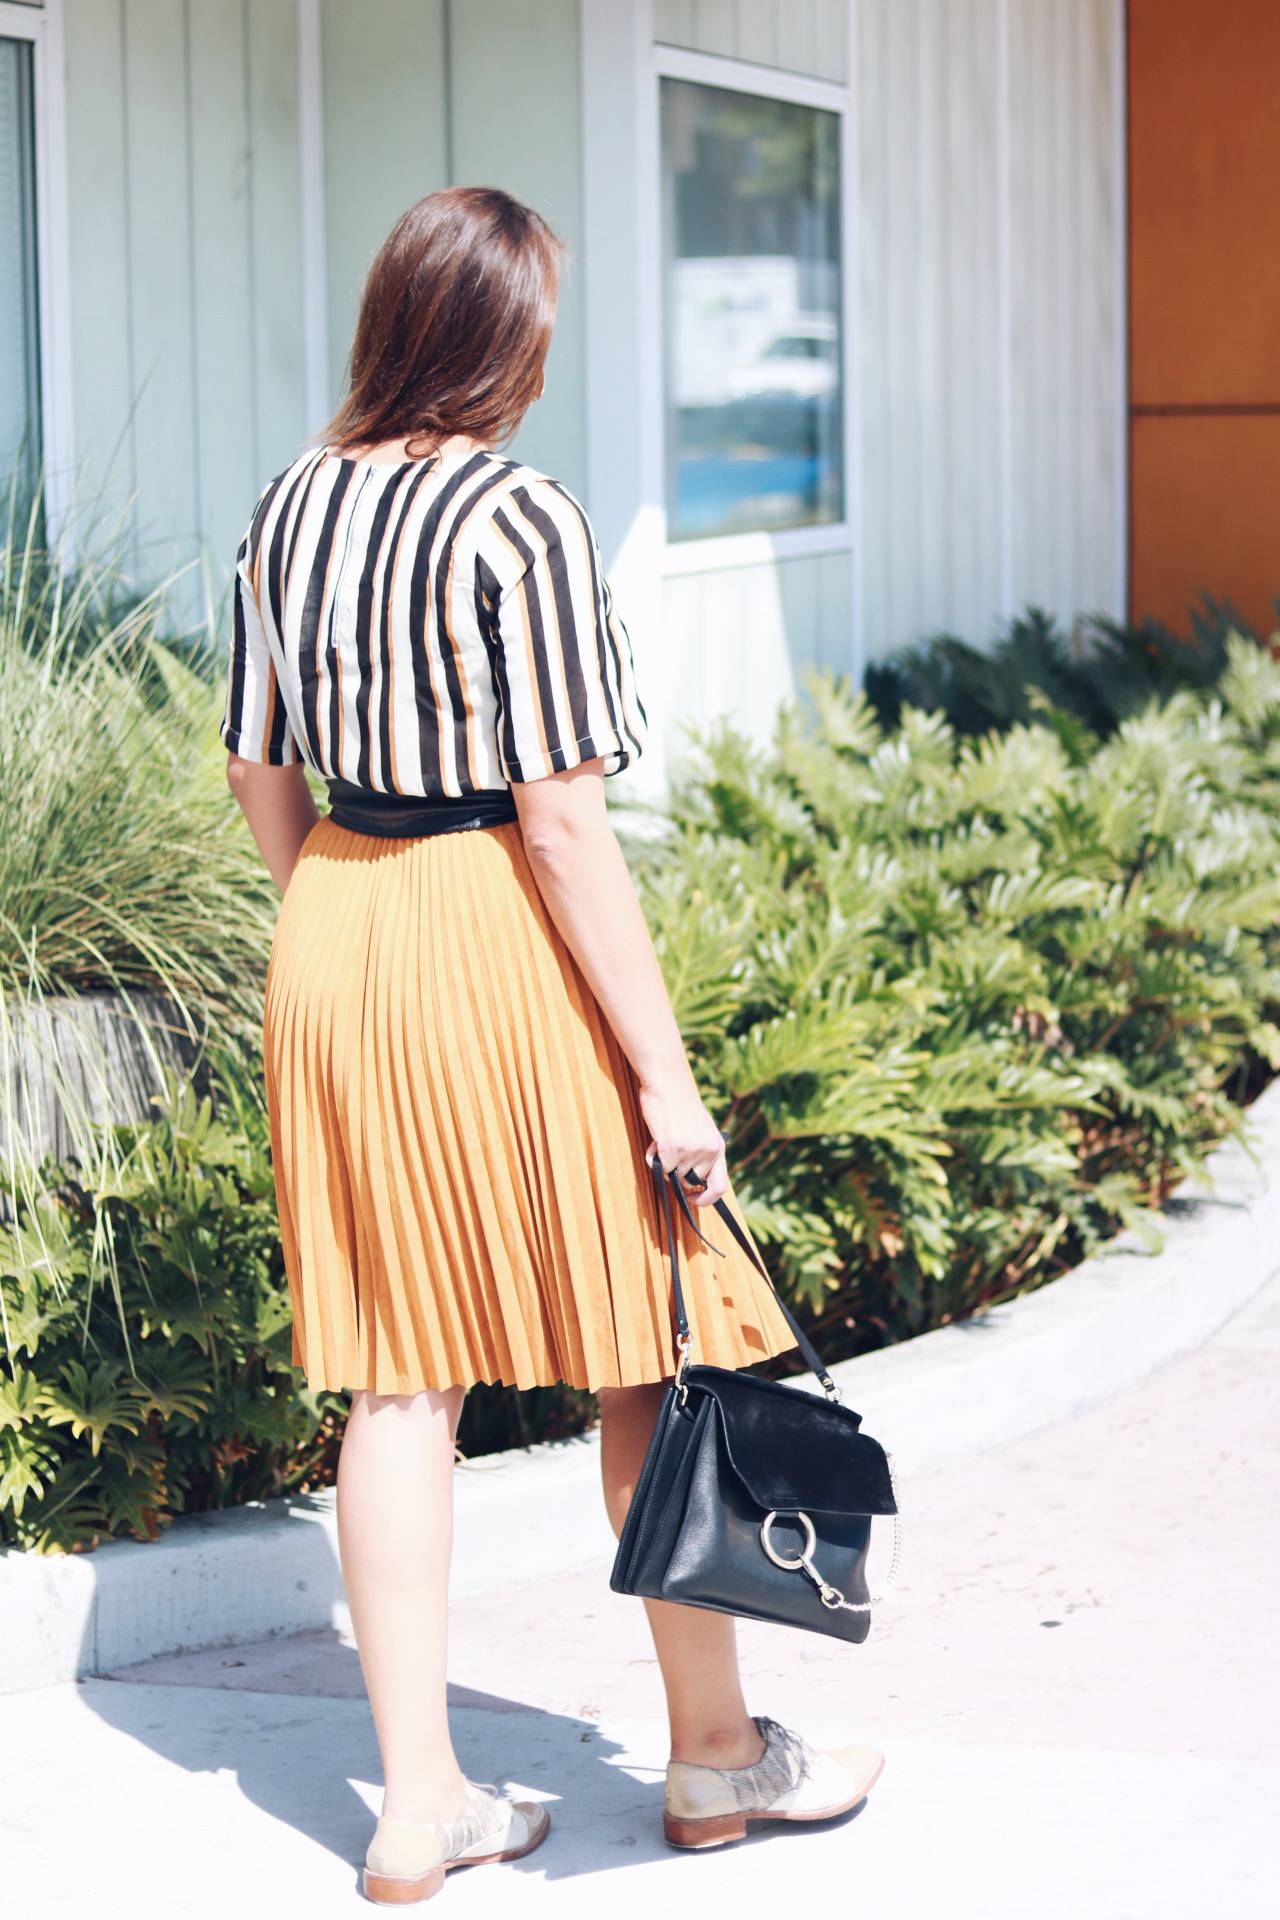 How to wear pleated skirts